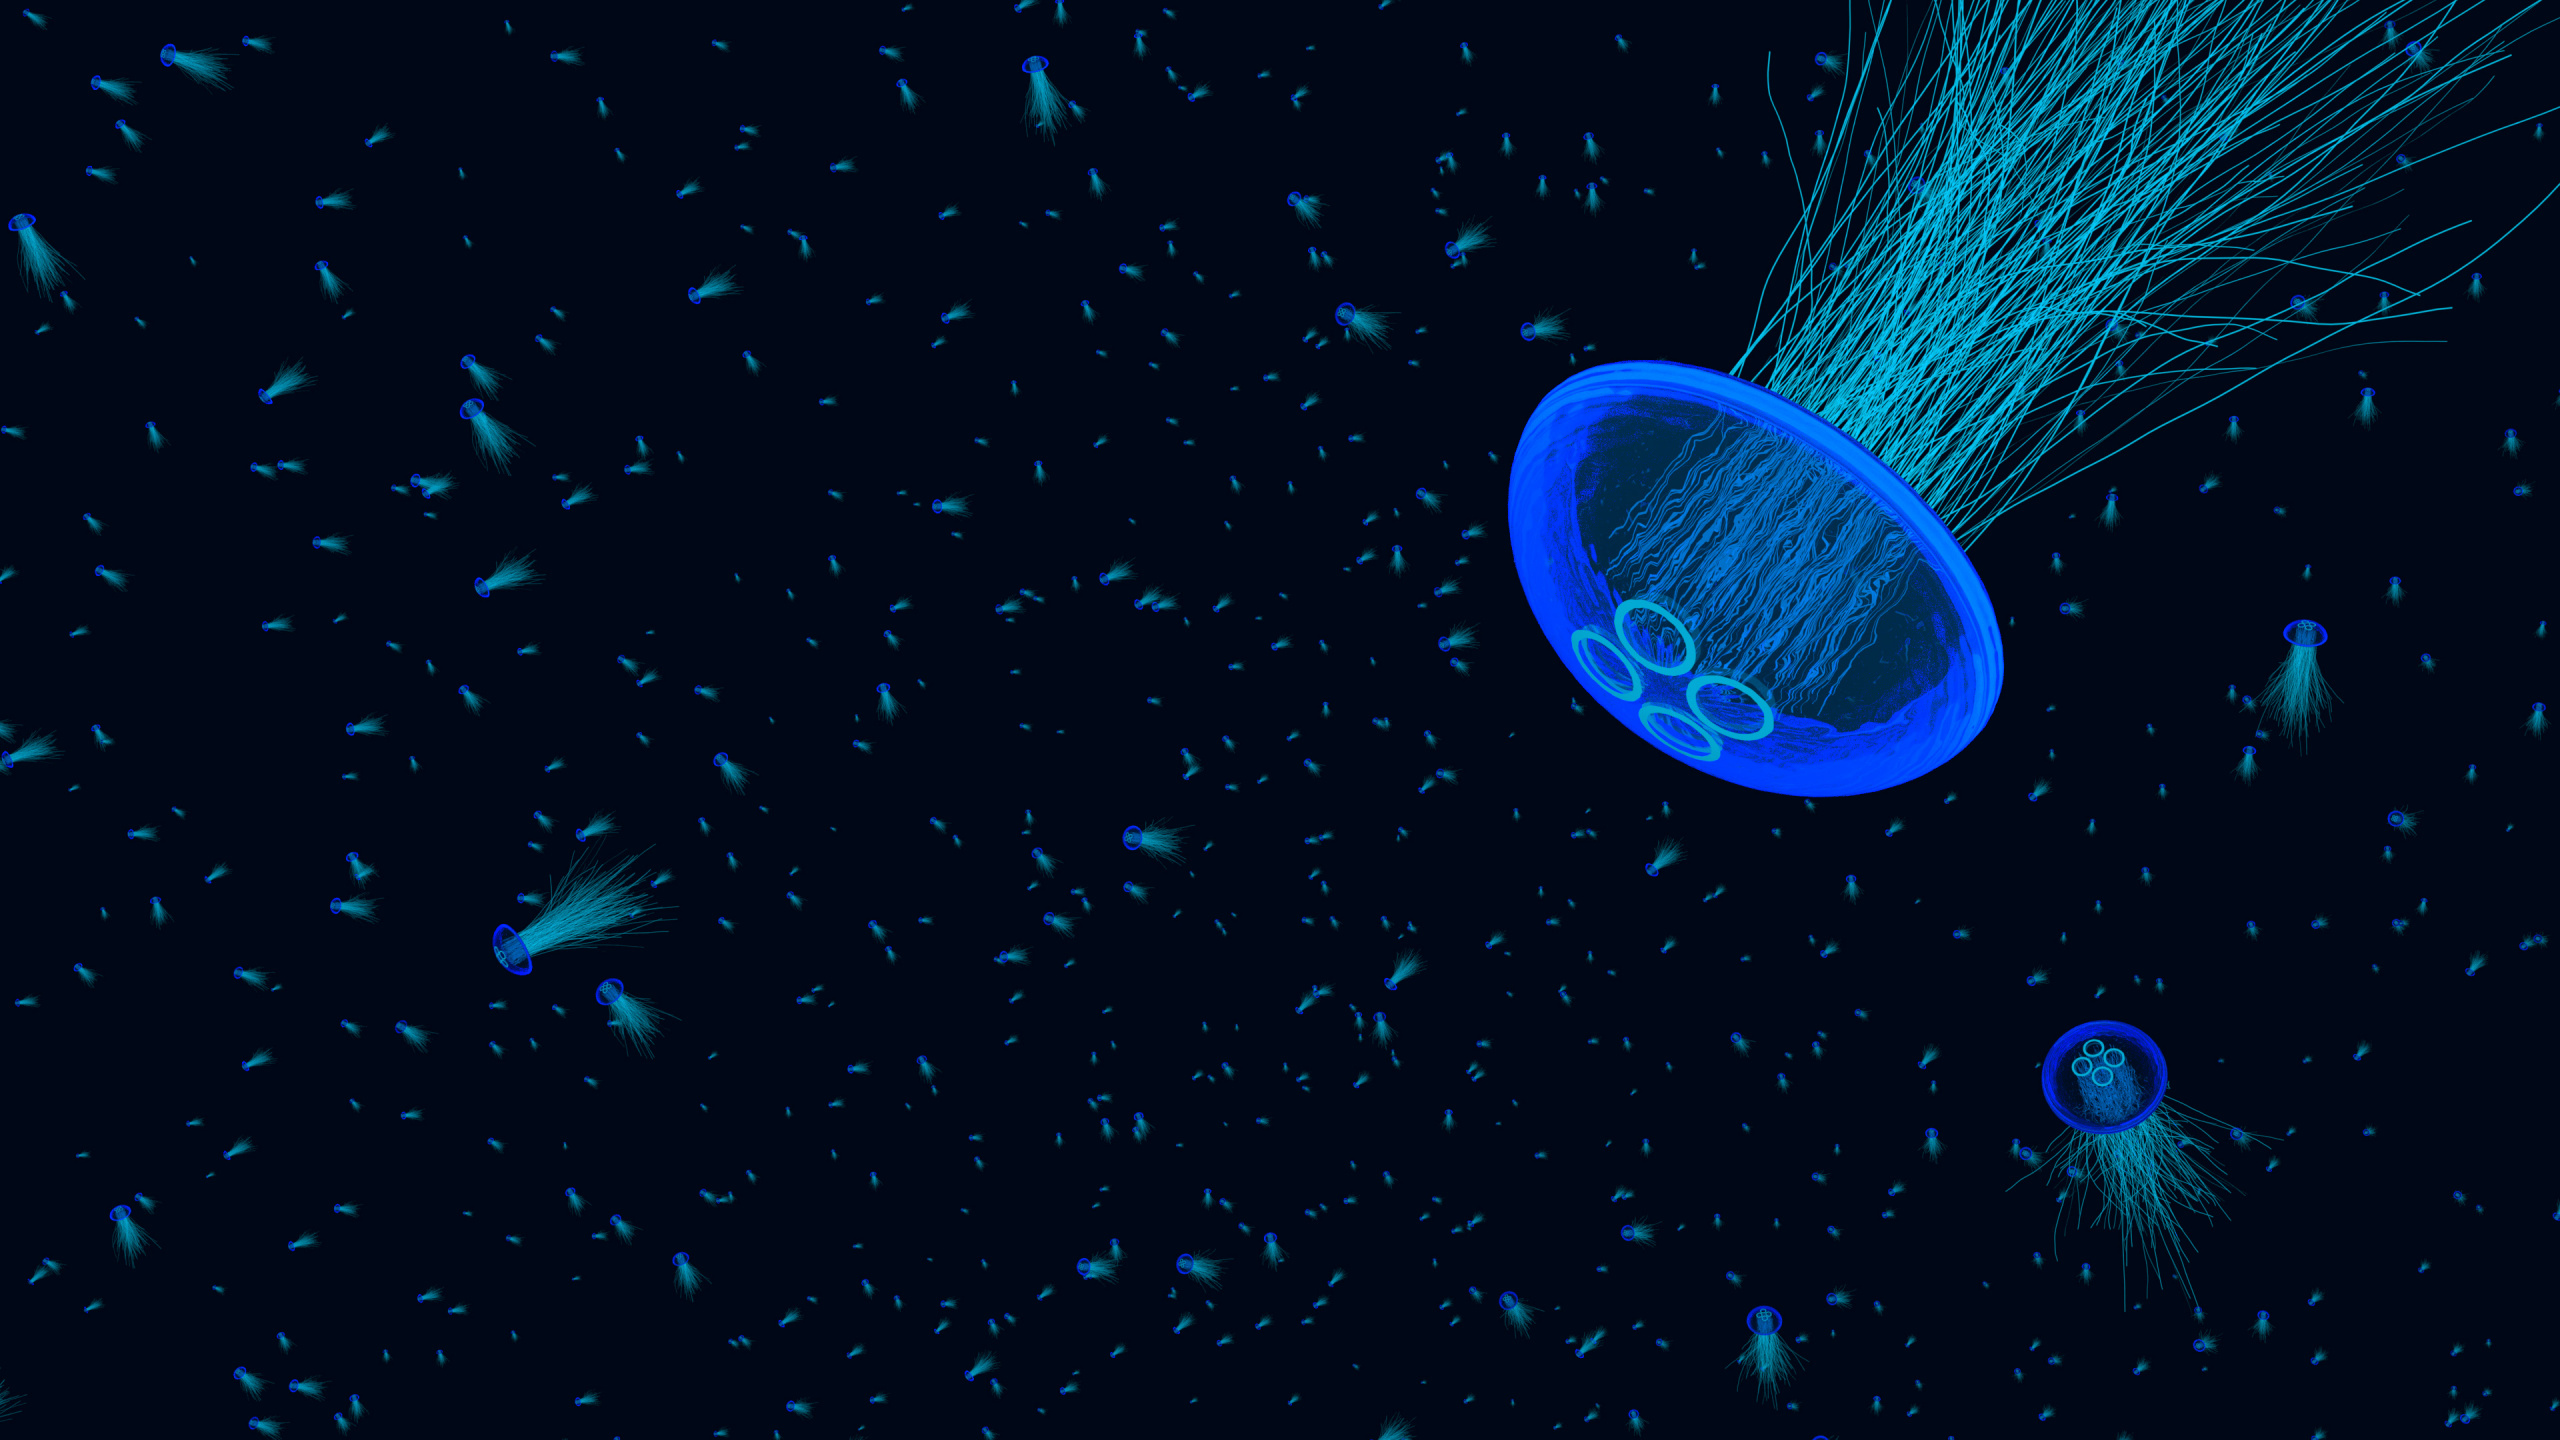 Blue Jellyfish in Water During Daytime. Wallpaper in 2560x1440 Resolution